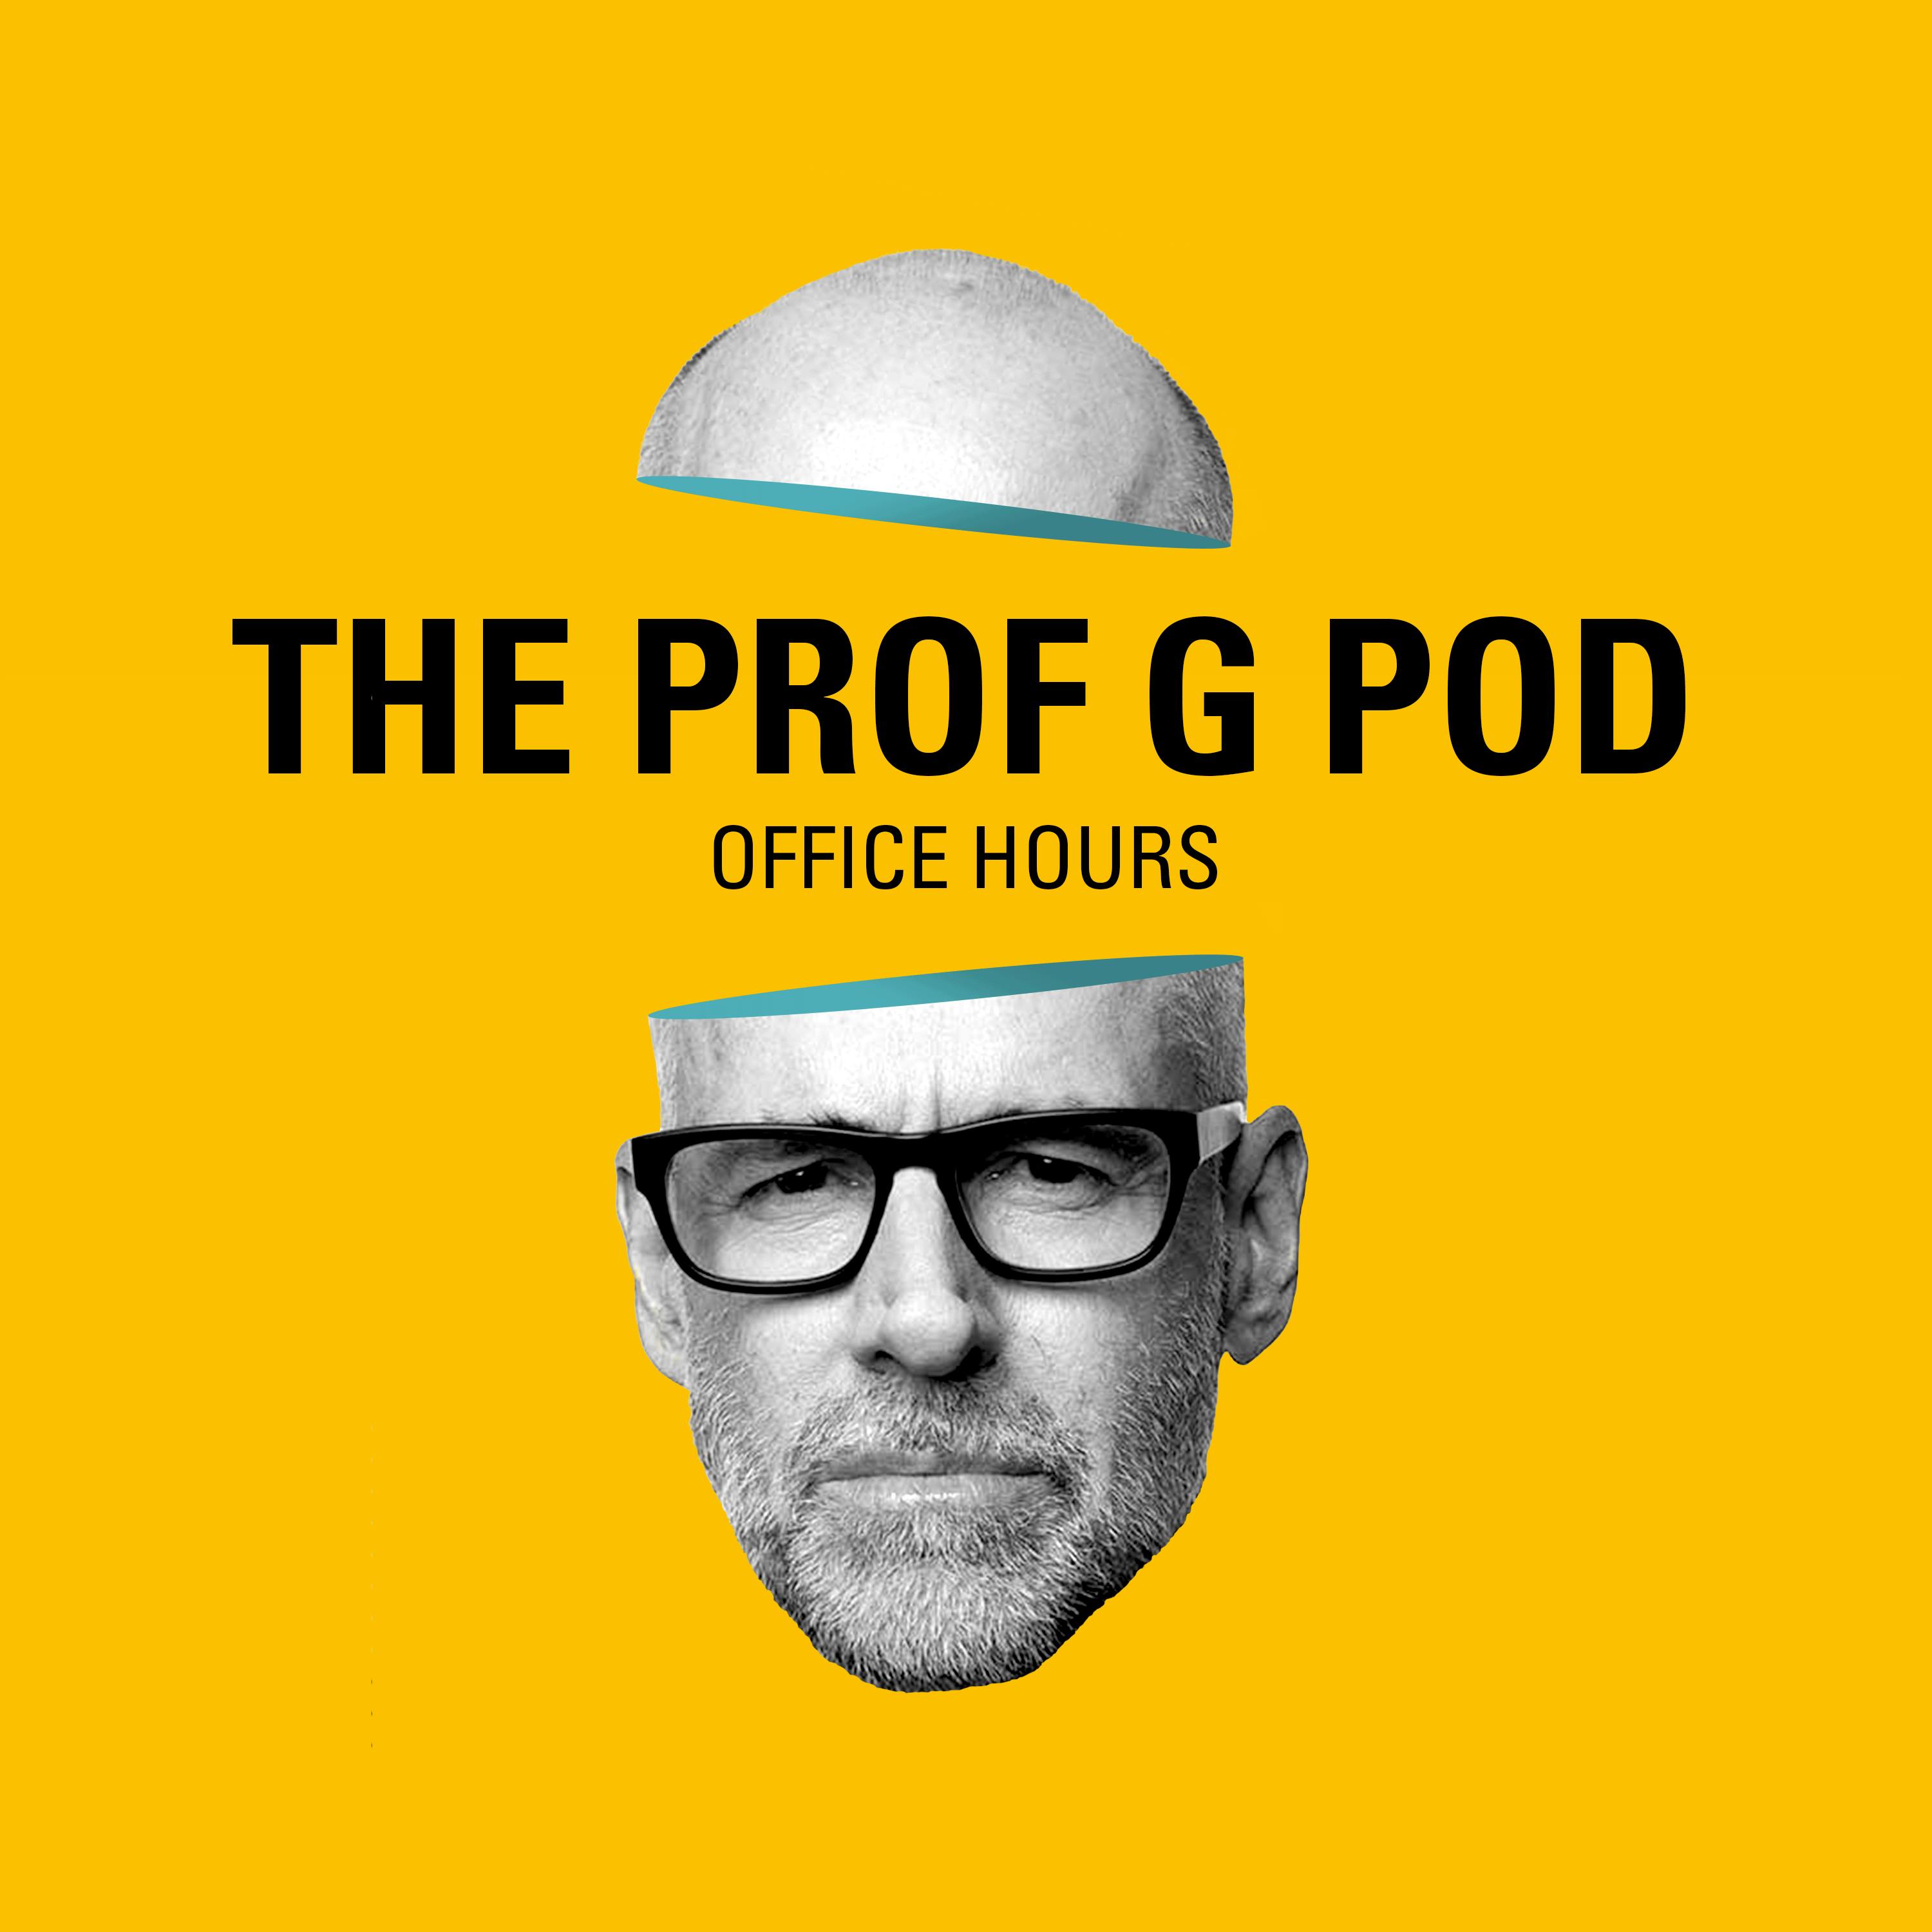 Office Hours: Why Don’t Companies Advertise on Explicit Sites? How to Negotiate Stock Options with an Employer, and How Scott Built a Public Speaking Career by Vox Media Podcast Network